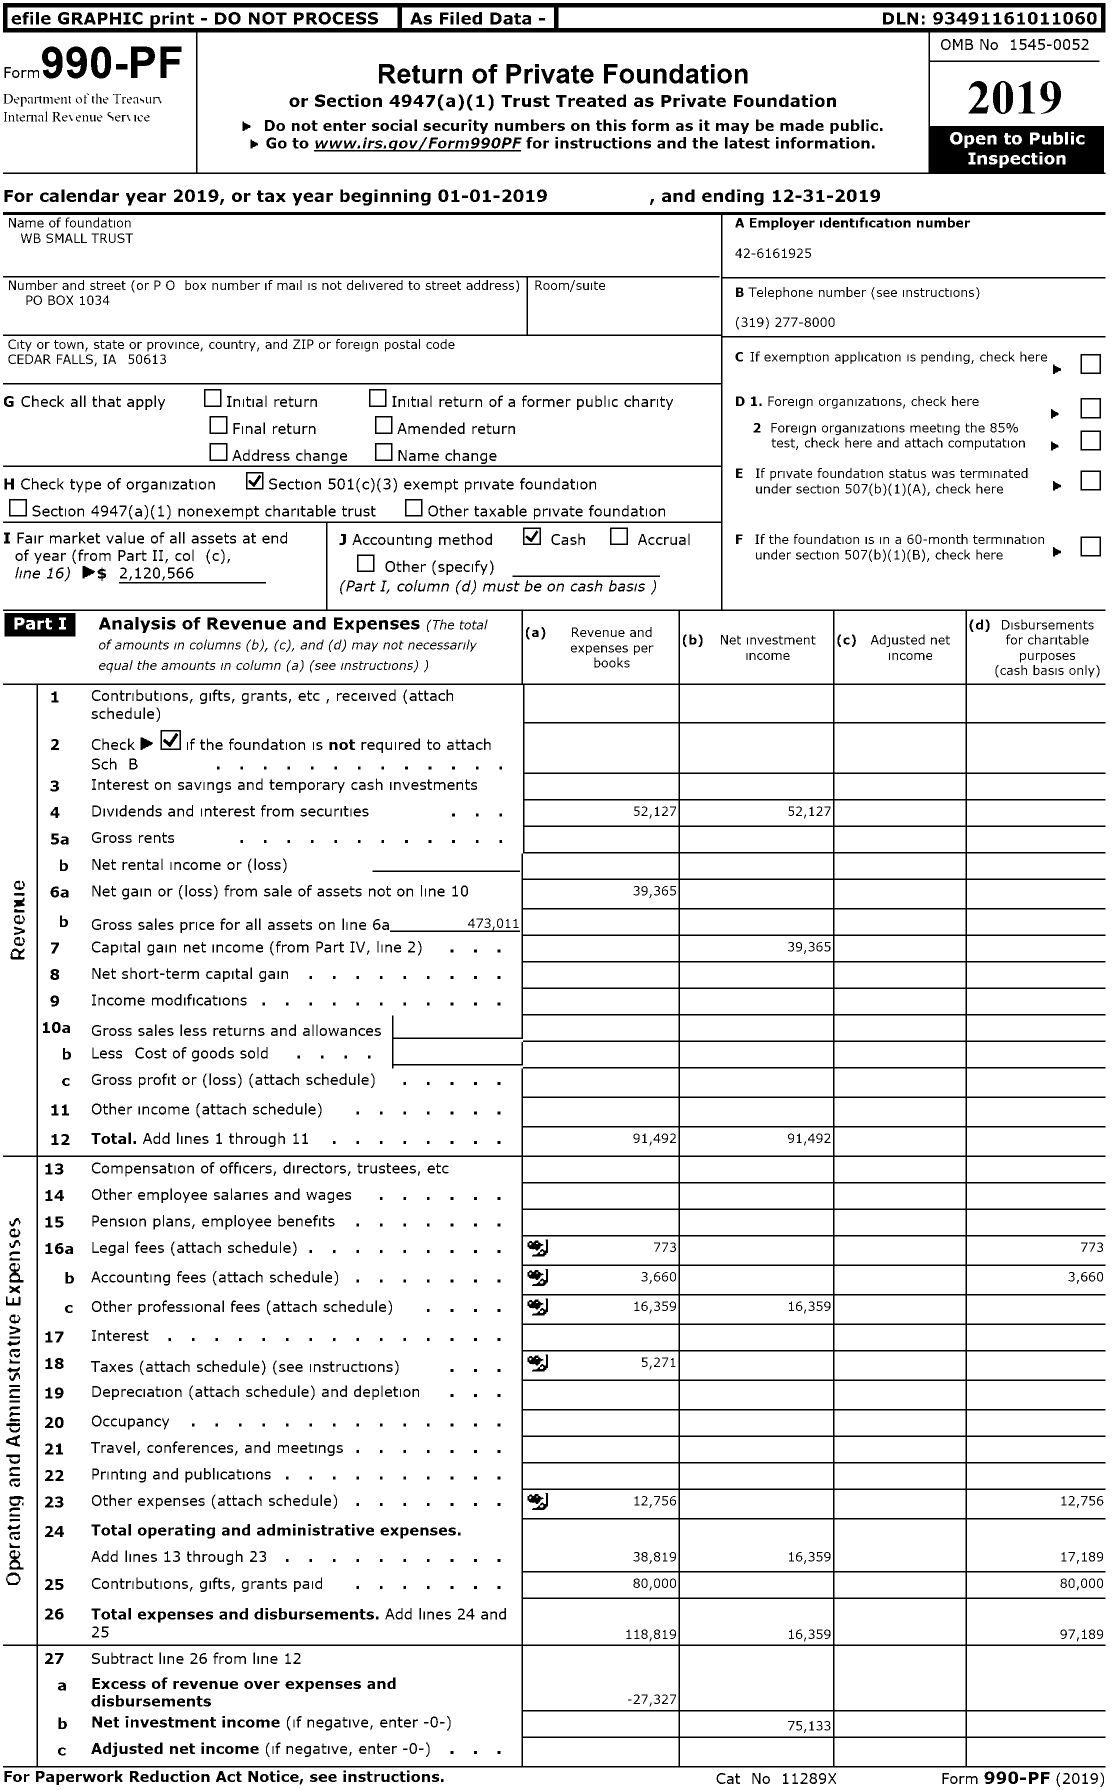 Image of first page of 2019 Form 990PR for WB Small Trust